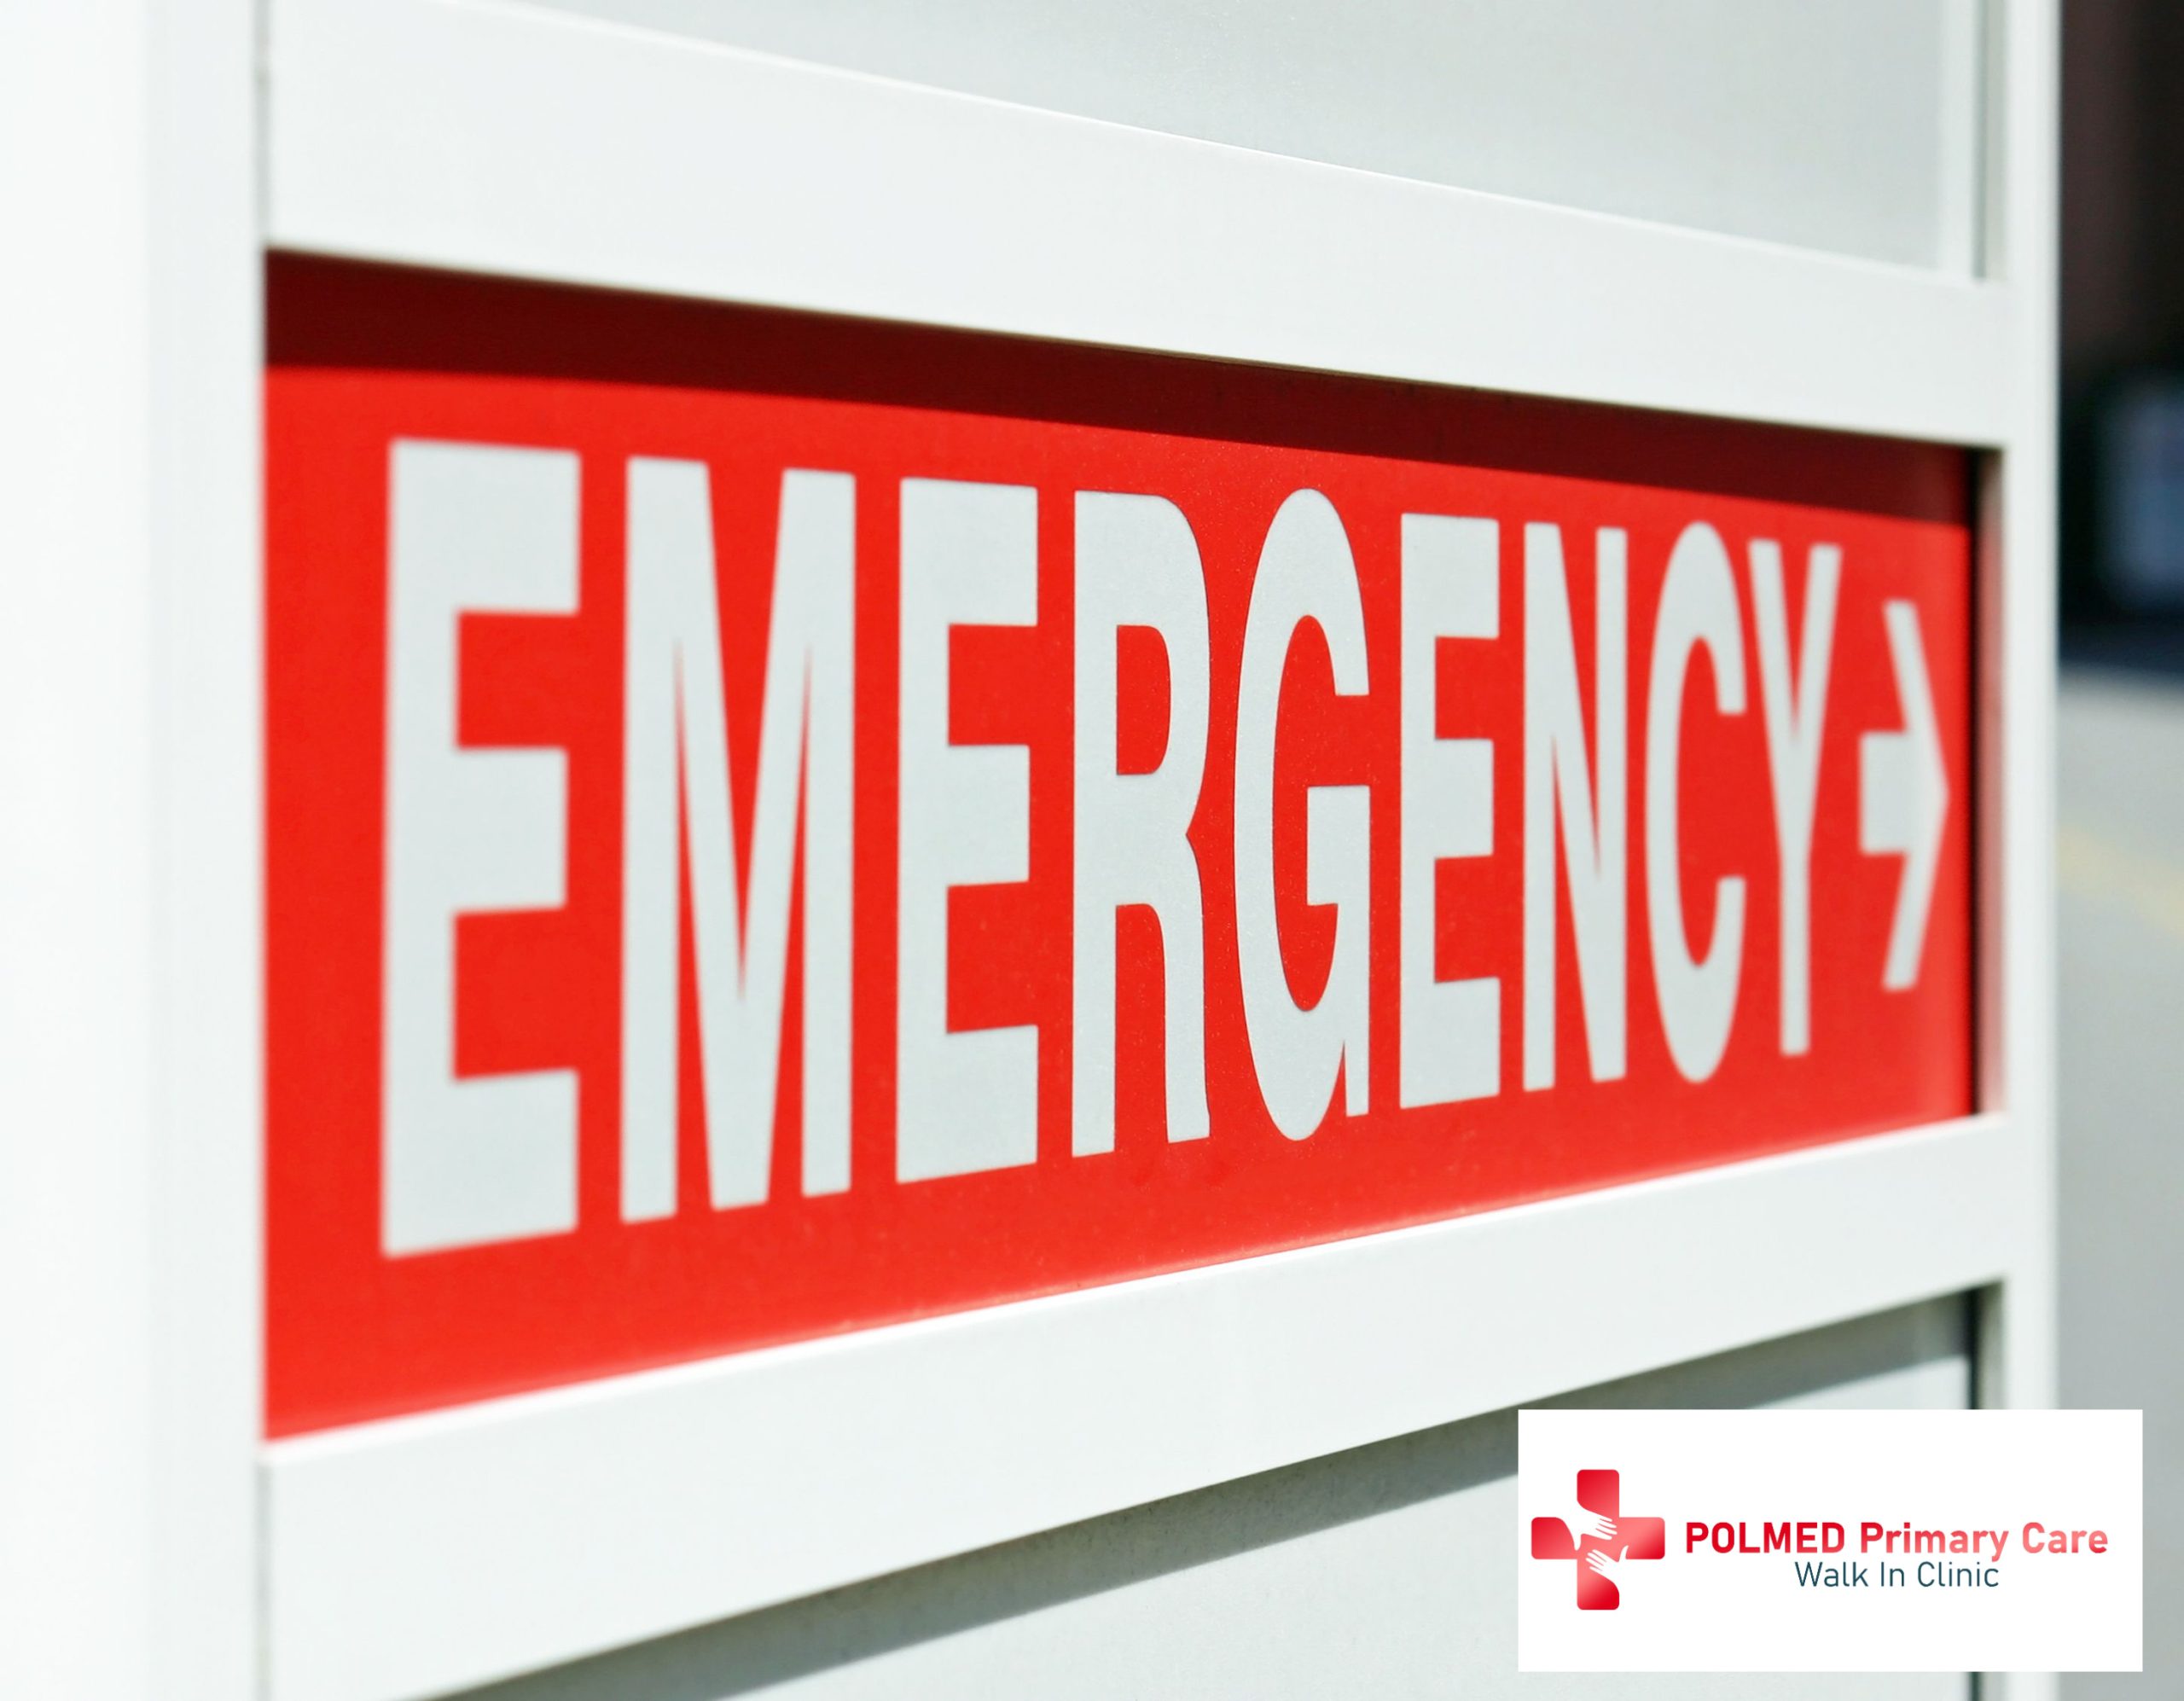 Feeling Ill? How Our Emergency Walk-In Clinic Can Help